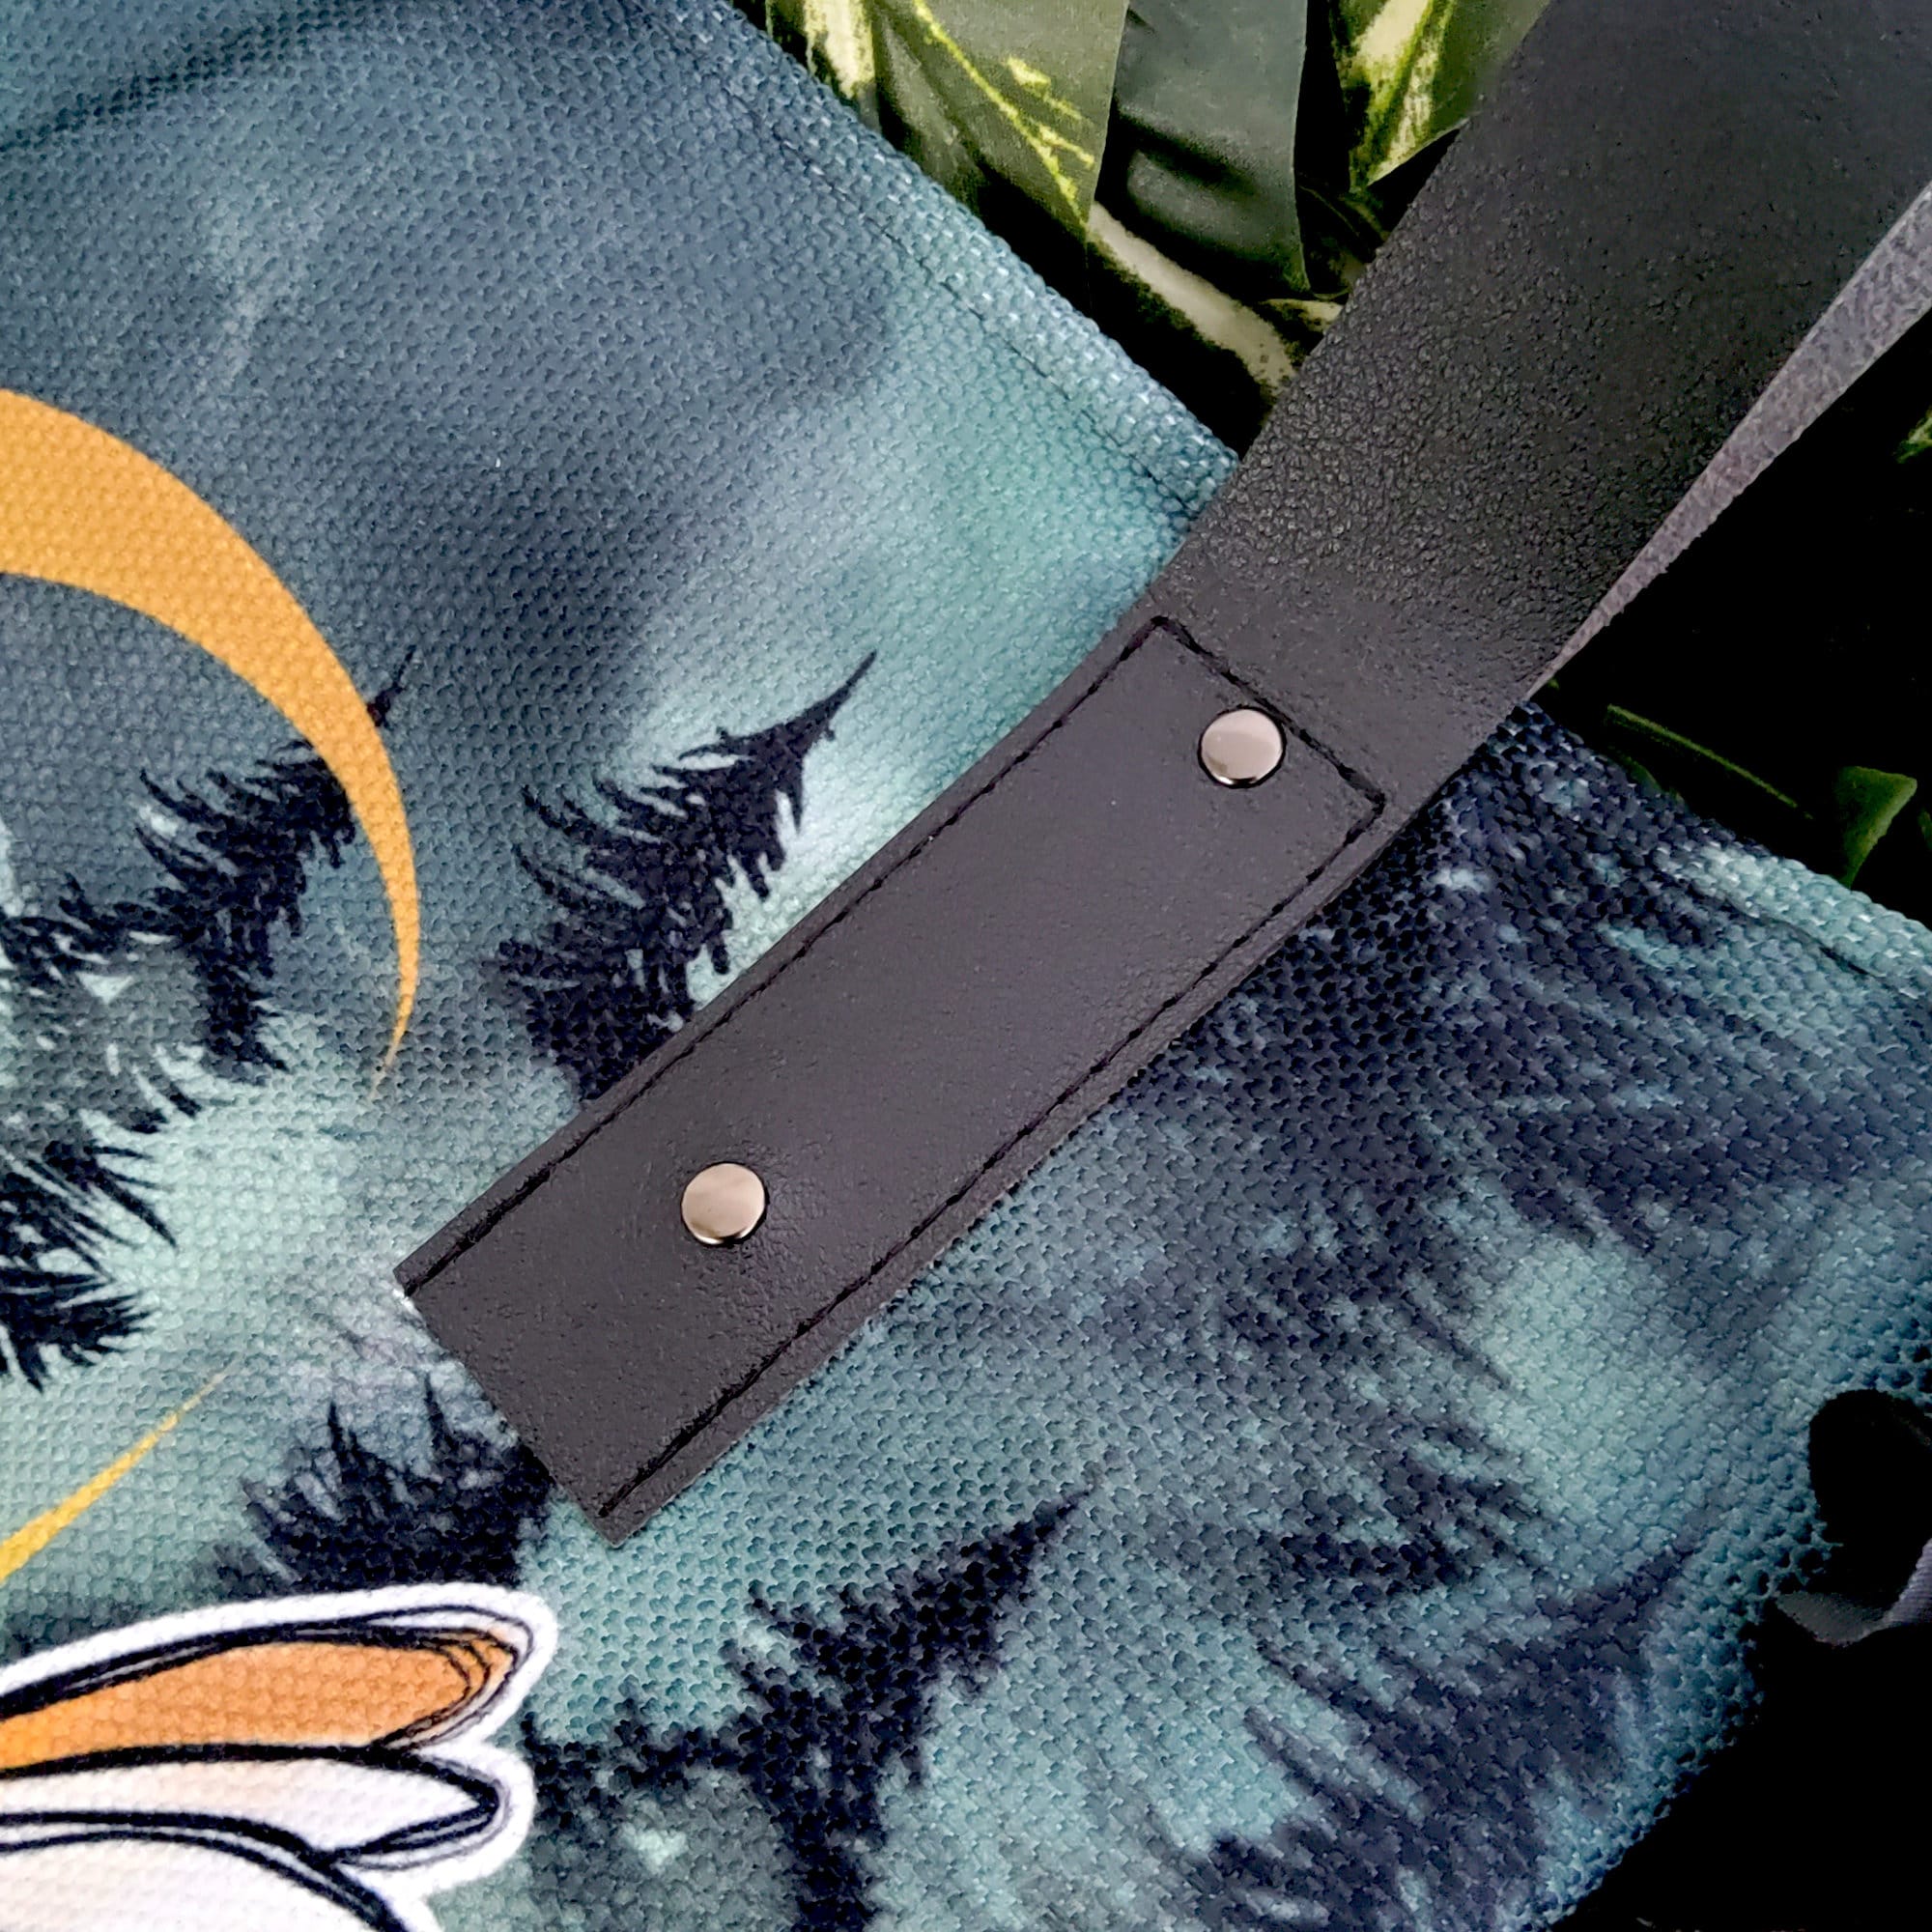 TOTE BAG : The Barn Owl with Dark Forest Bag with Vegan Leather Straps and Magnetic Closure